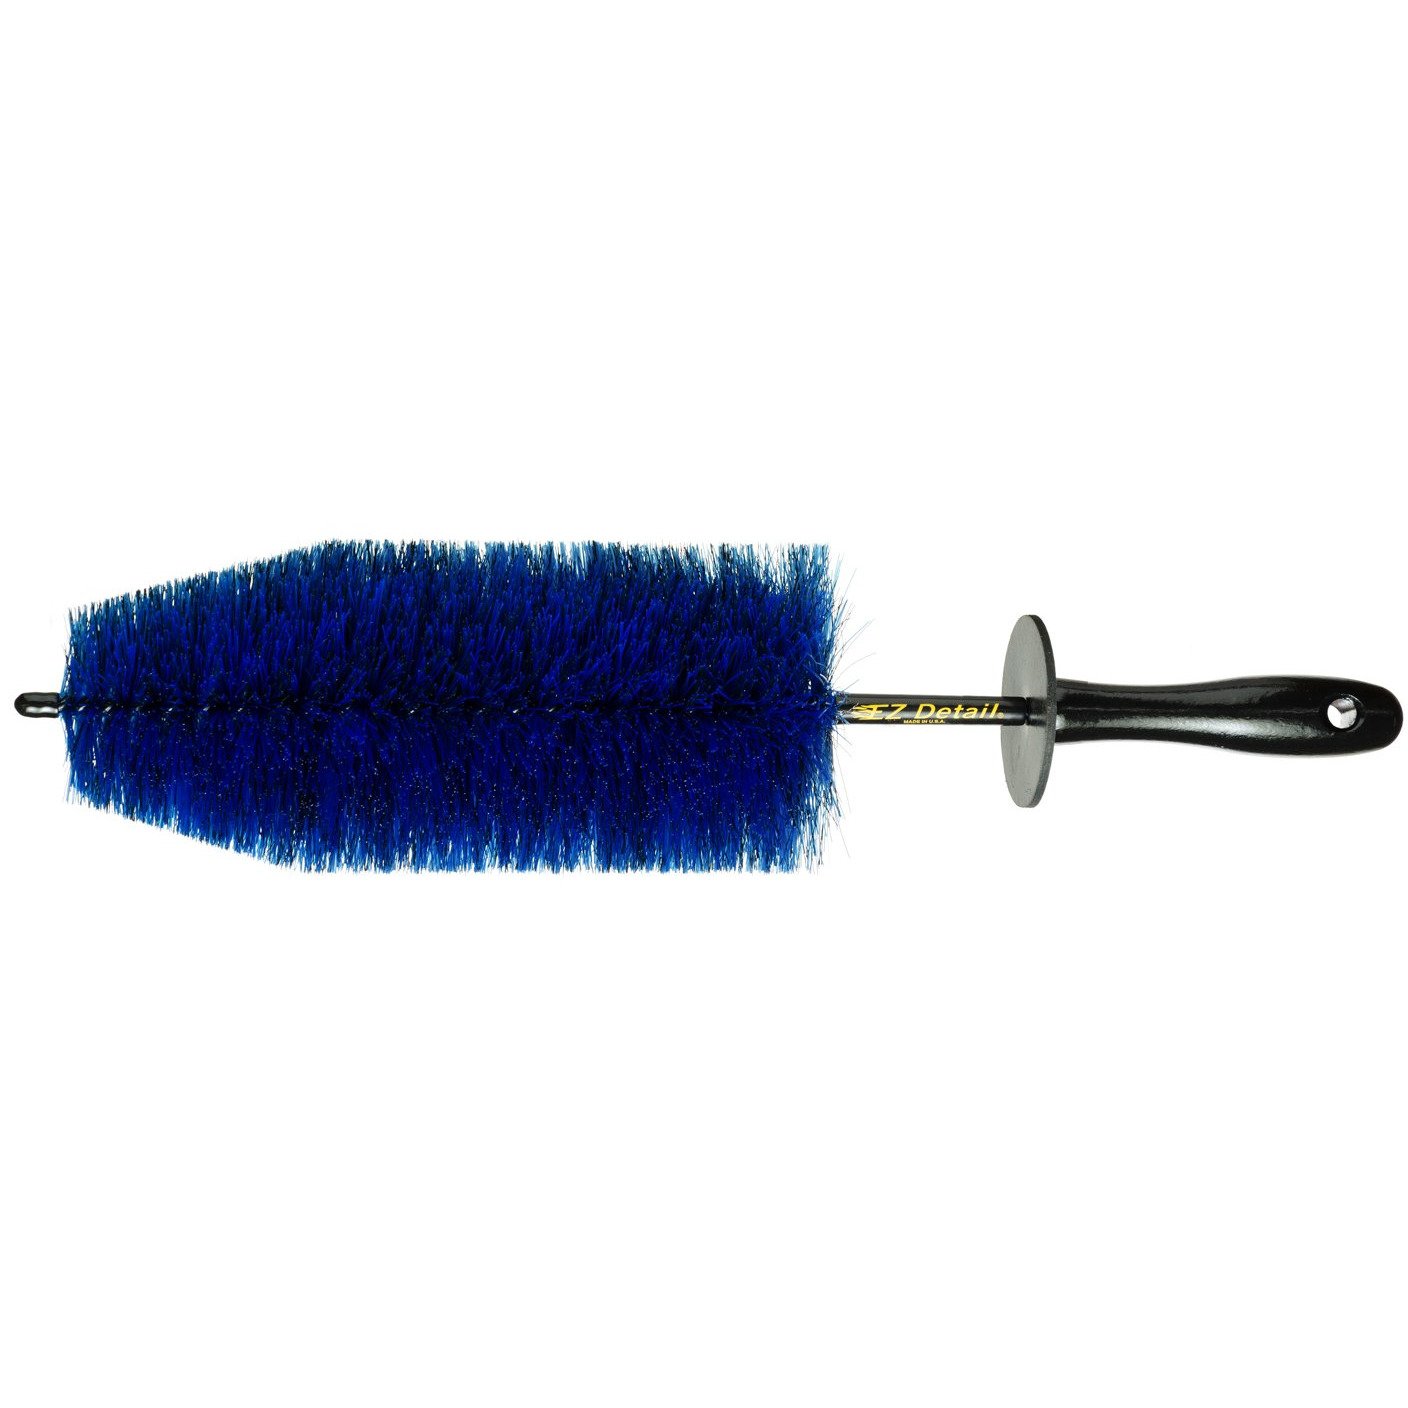 Autoforge TRI-ANGLE Boar's Hair Wash Brush - Handle Available - No